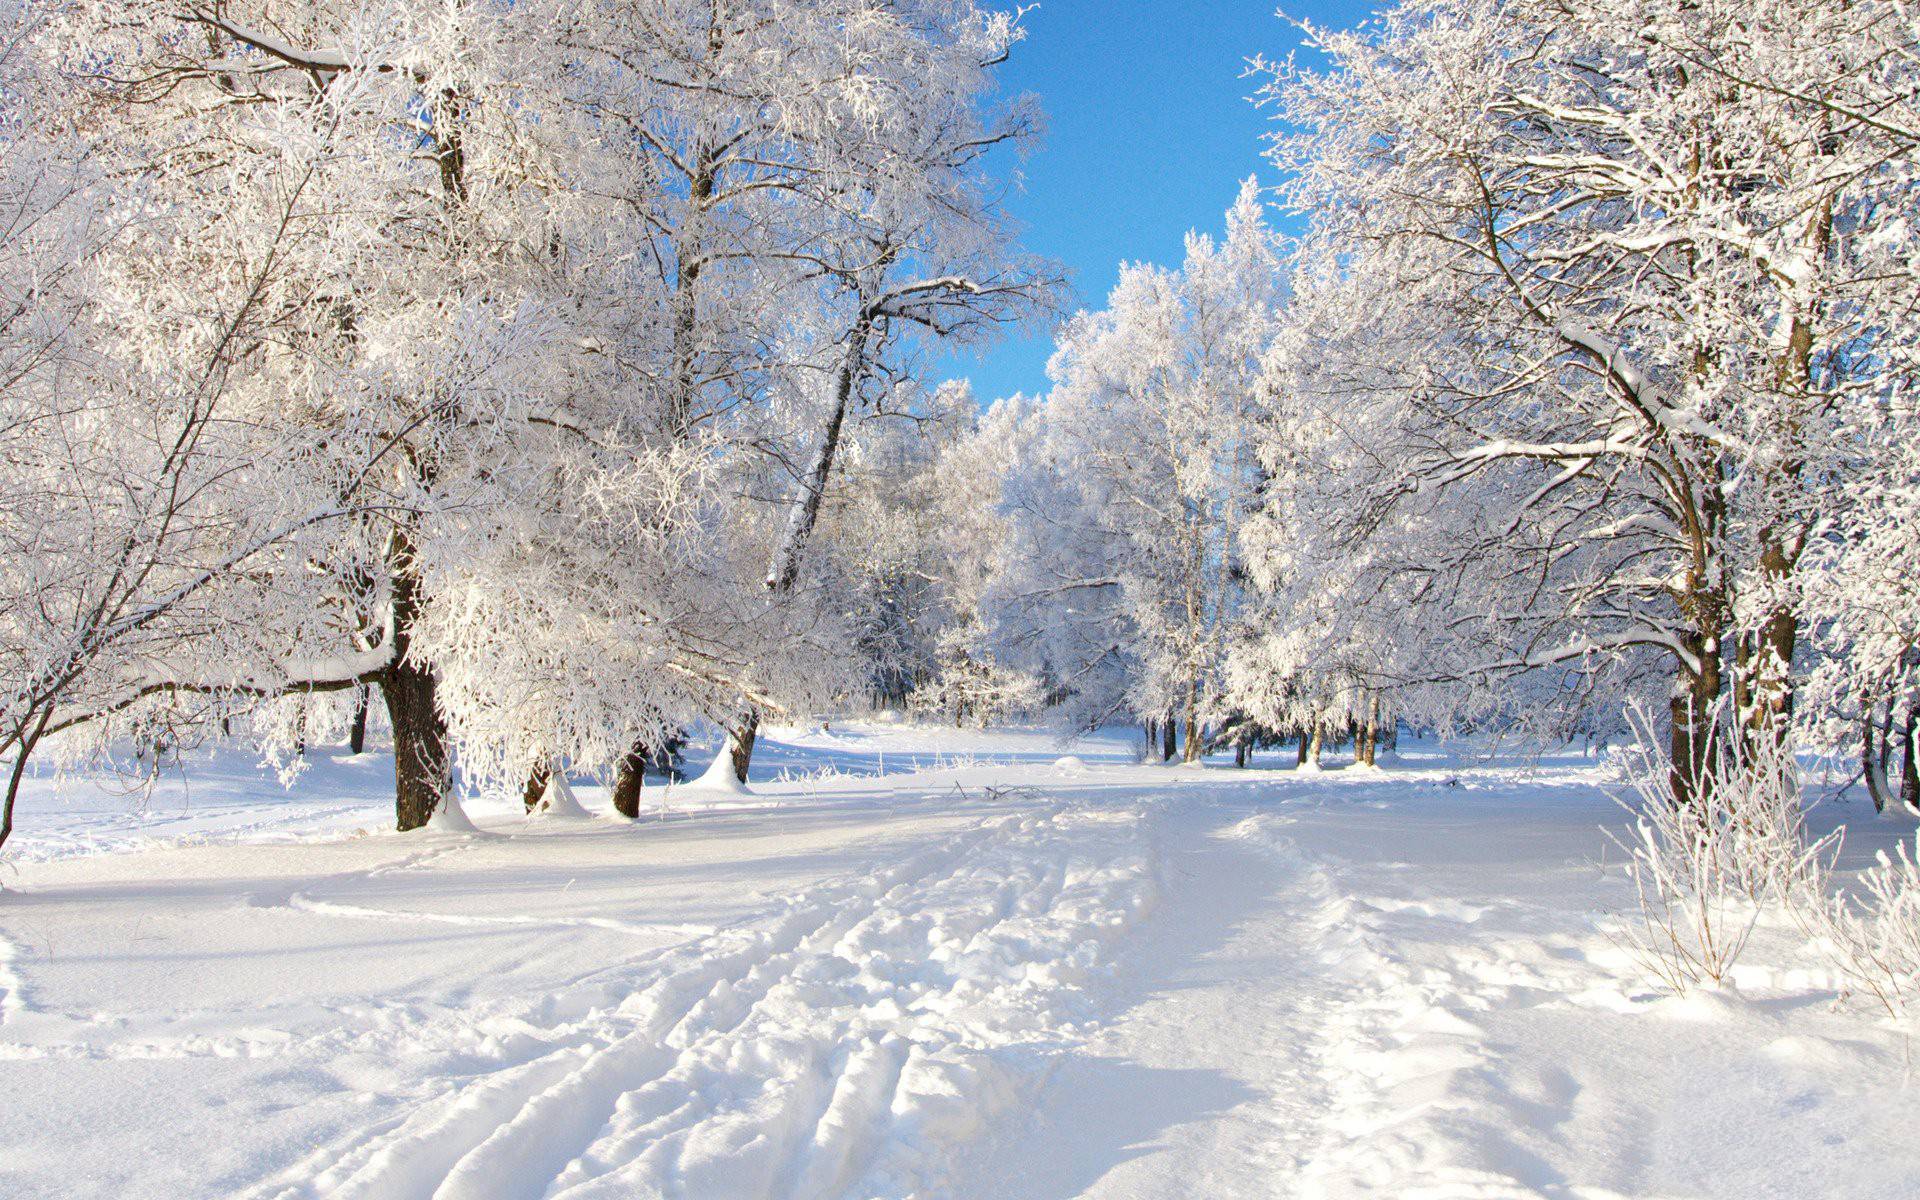 Winter Pictures Wallpapers Free